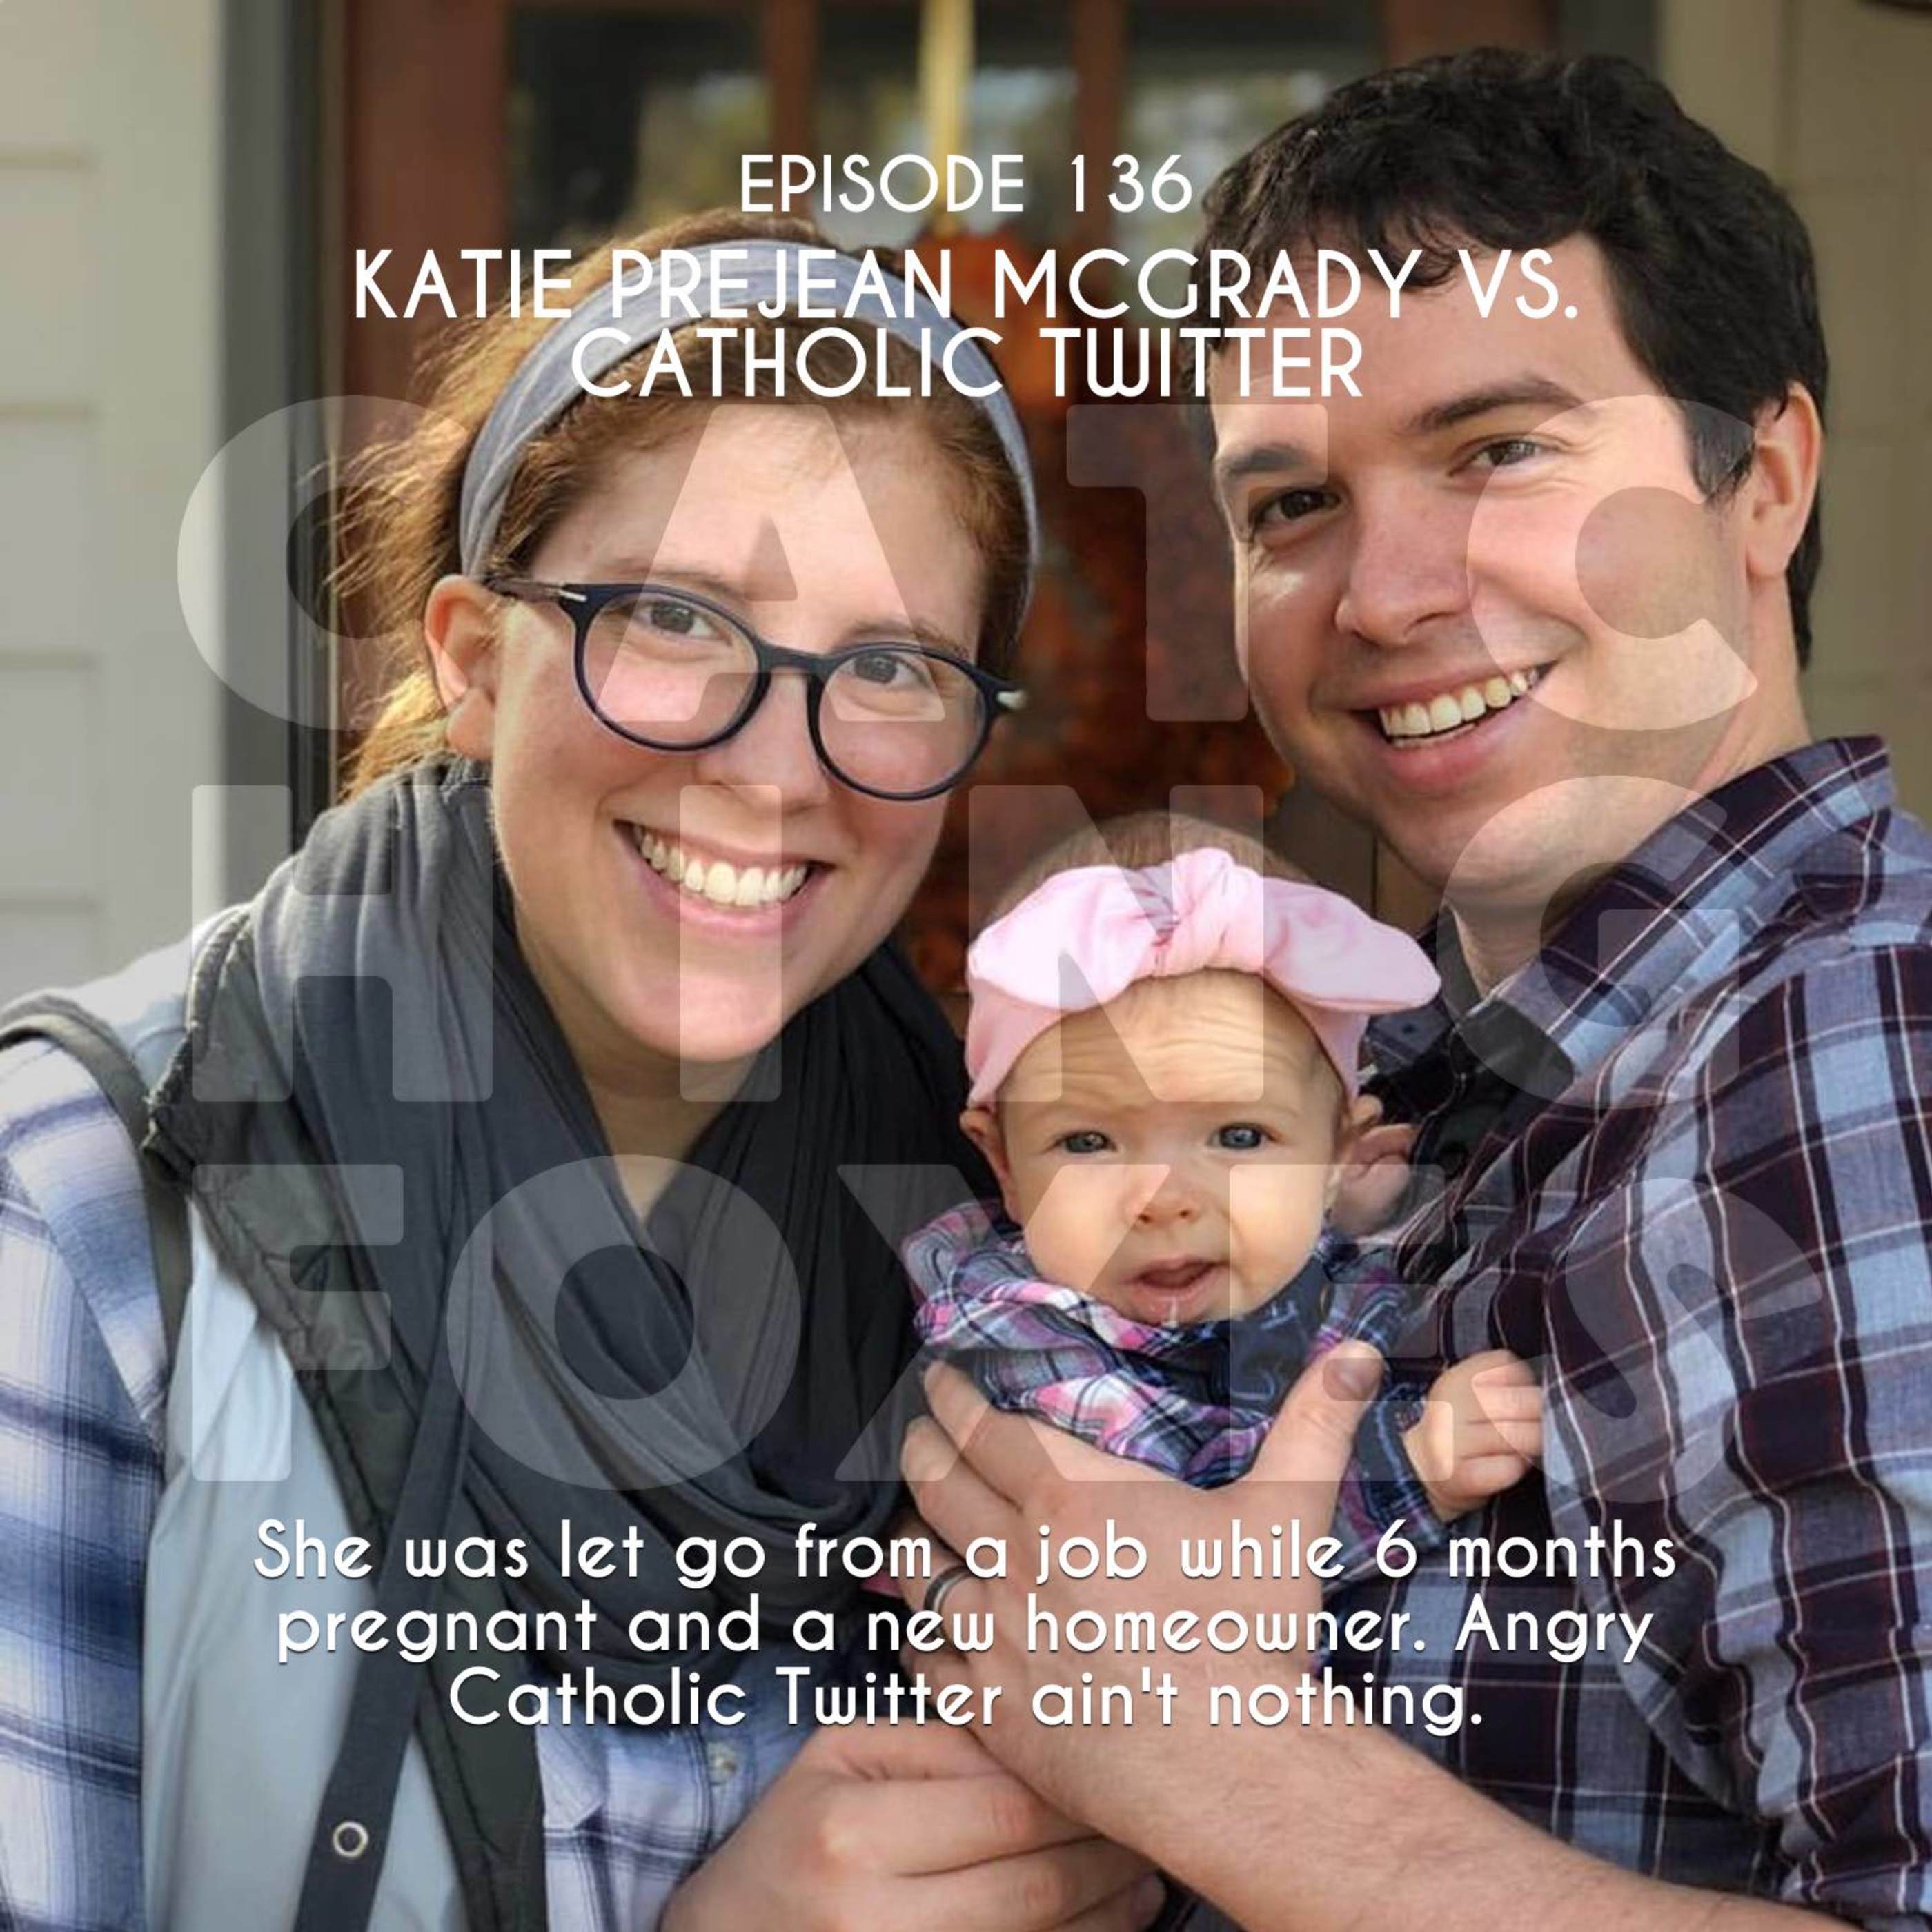 Katie Prejean McGrady vs Catholic Twitter by Catching Foxes | Podchaser